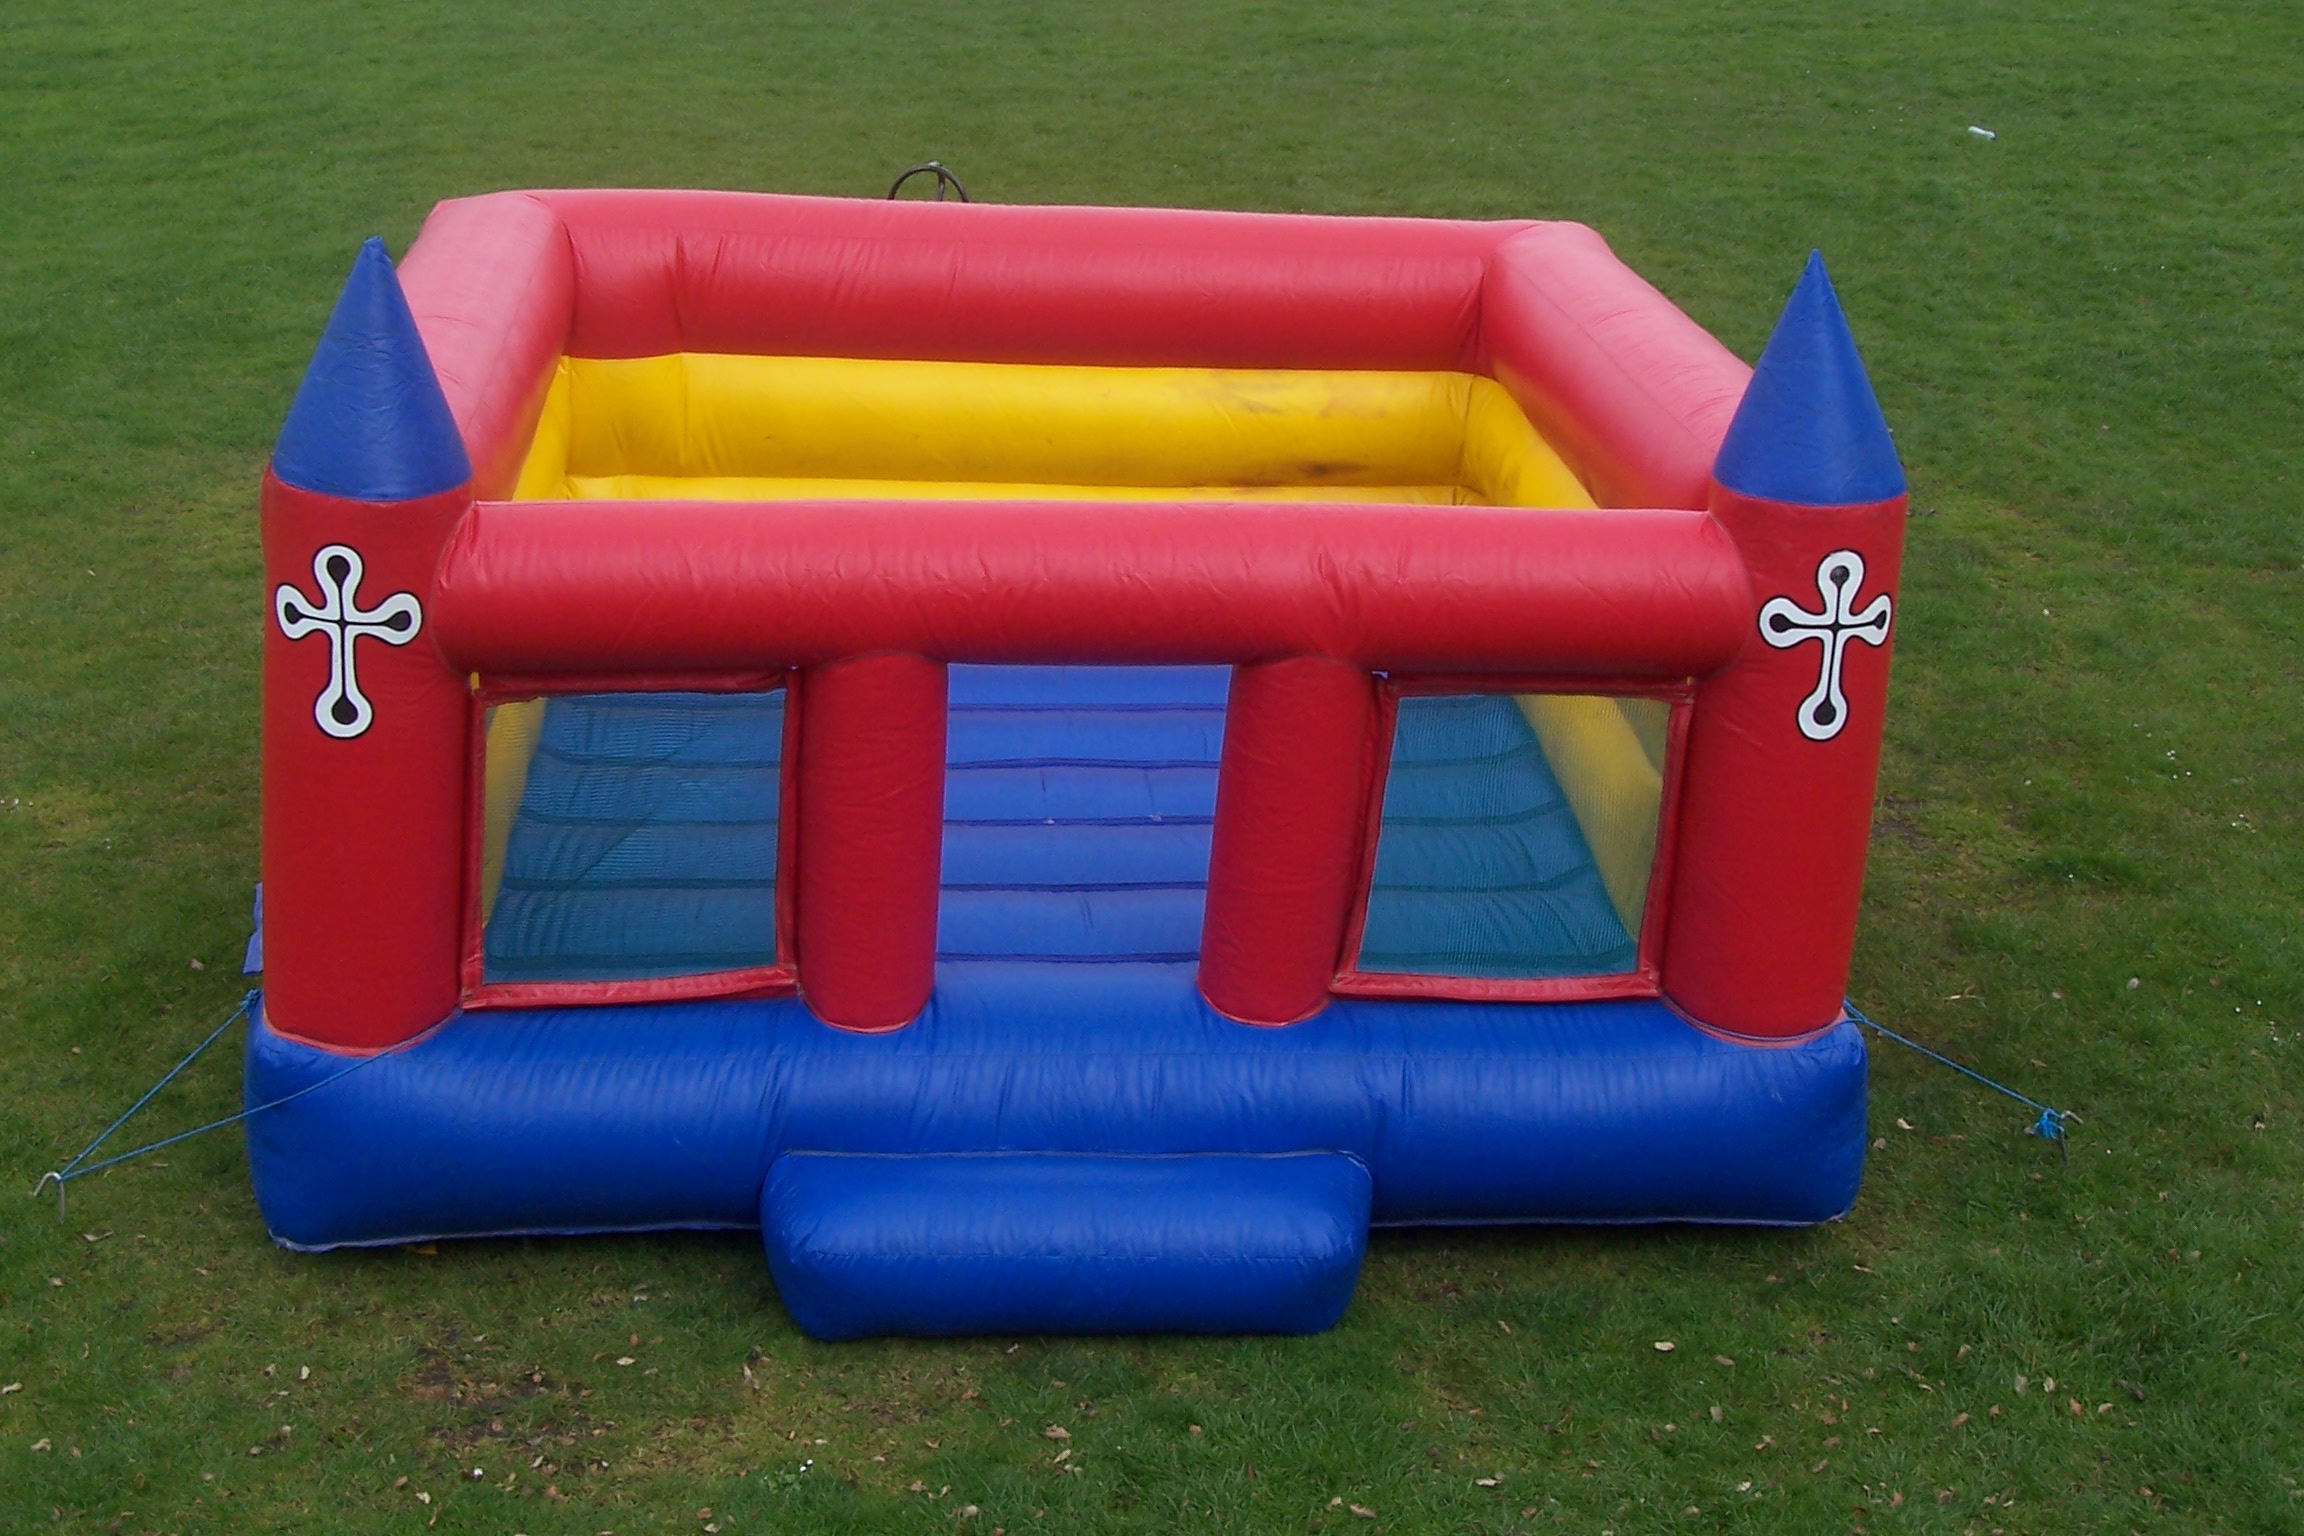 This Low Wall Bouncy Castle is perfect for use in halls with ceilings less than 8 feet high. Spacious and super bouncy, this castle is suitable for children up to the age of 13. Children must be supervised, as with all of our castles.